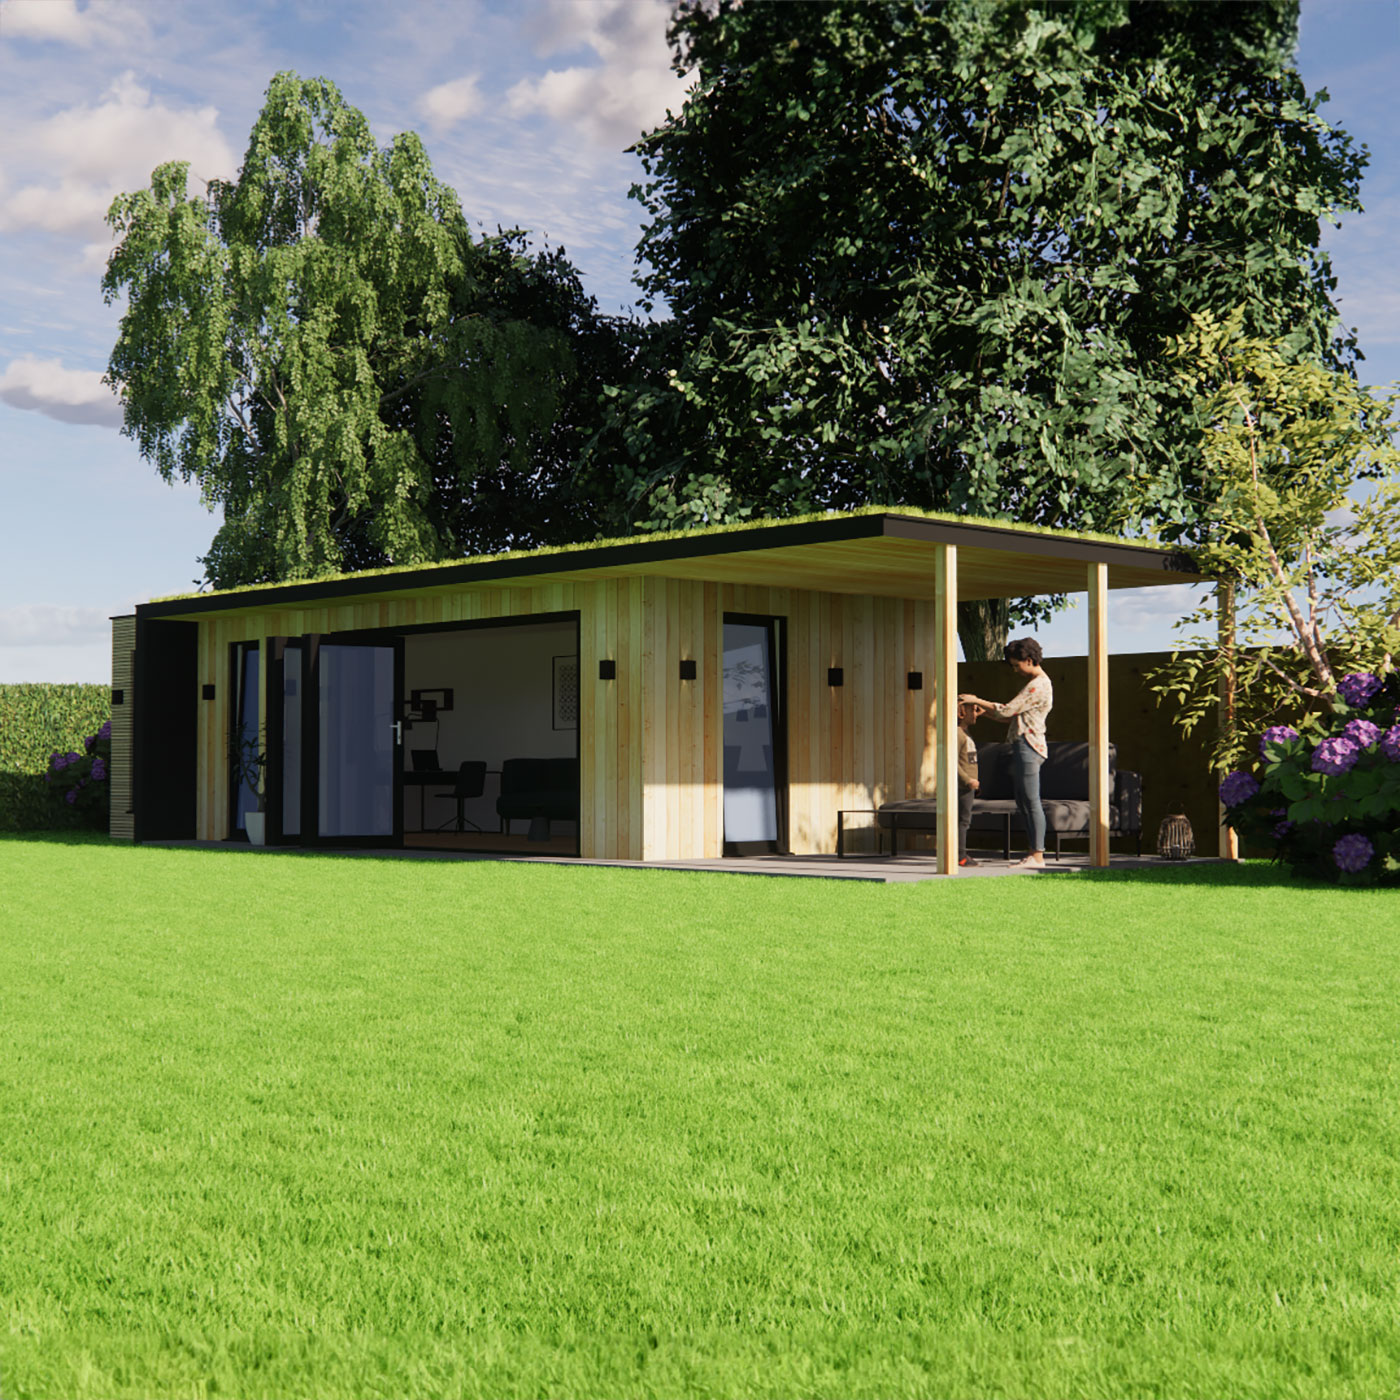 Visualisation of garden office with green roof 3.6m by 8.6m